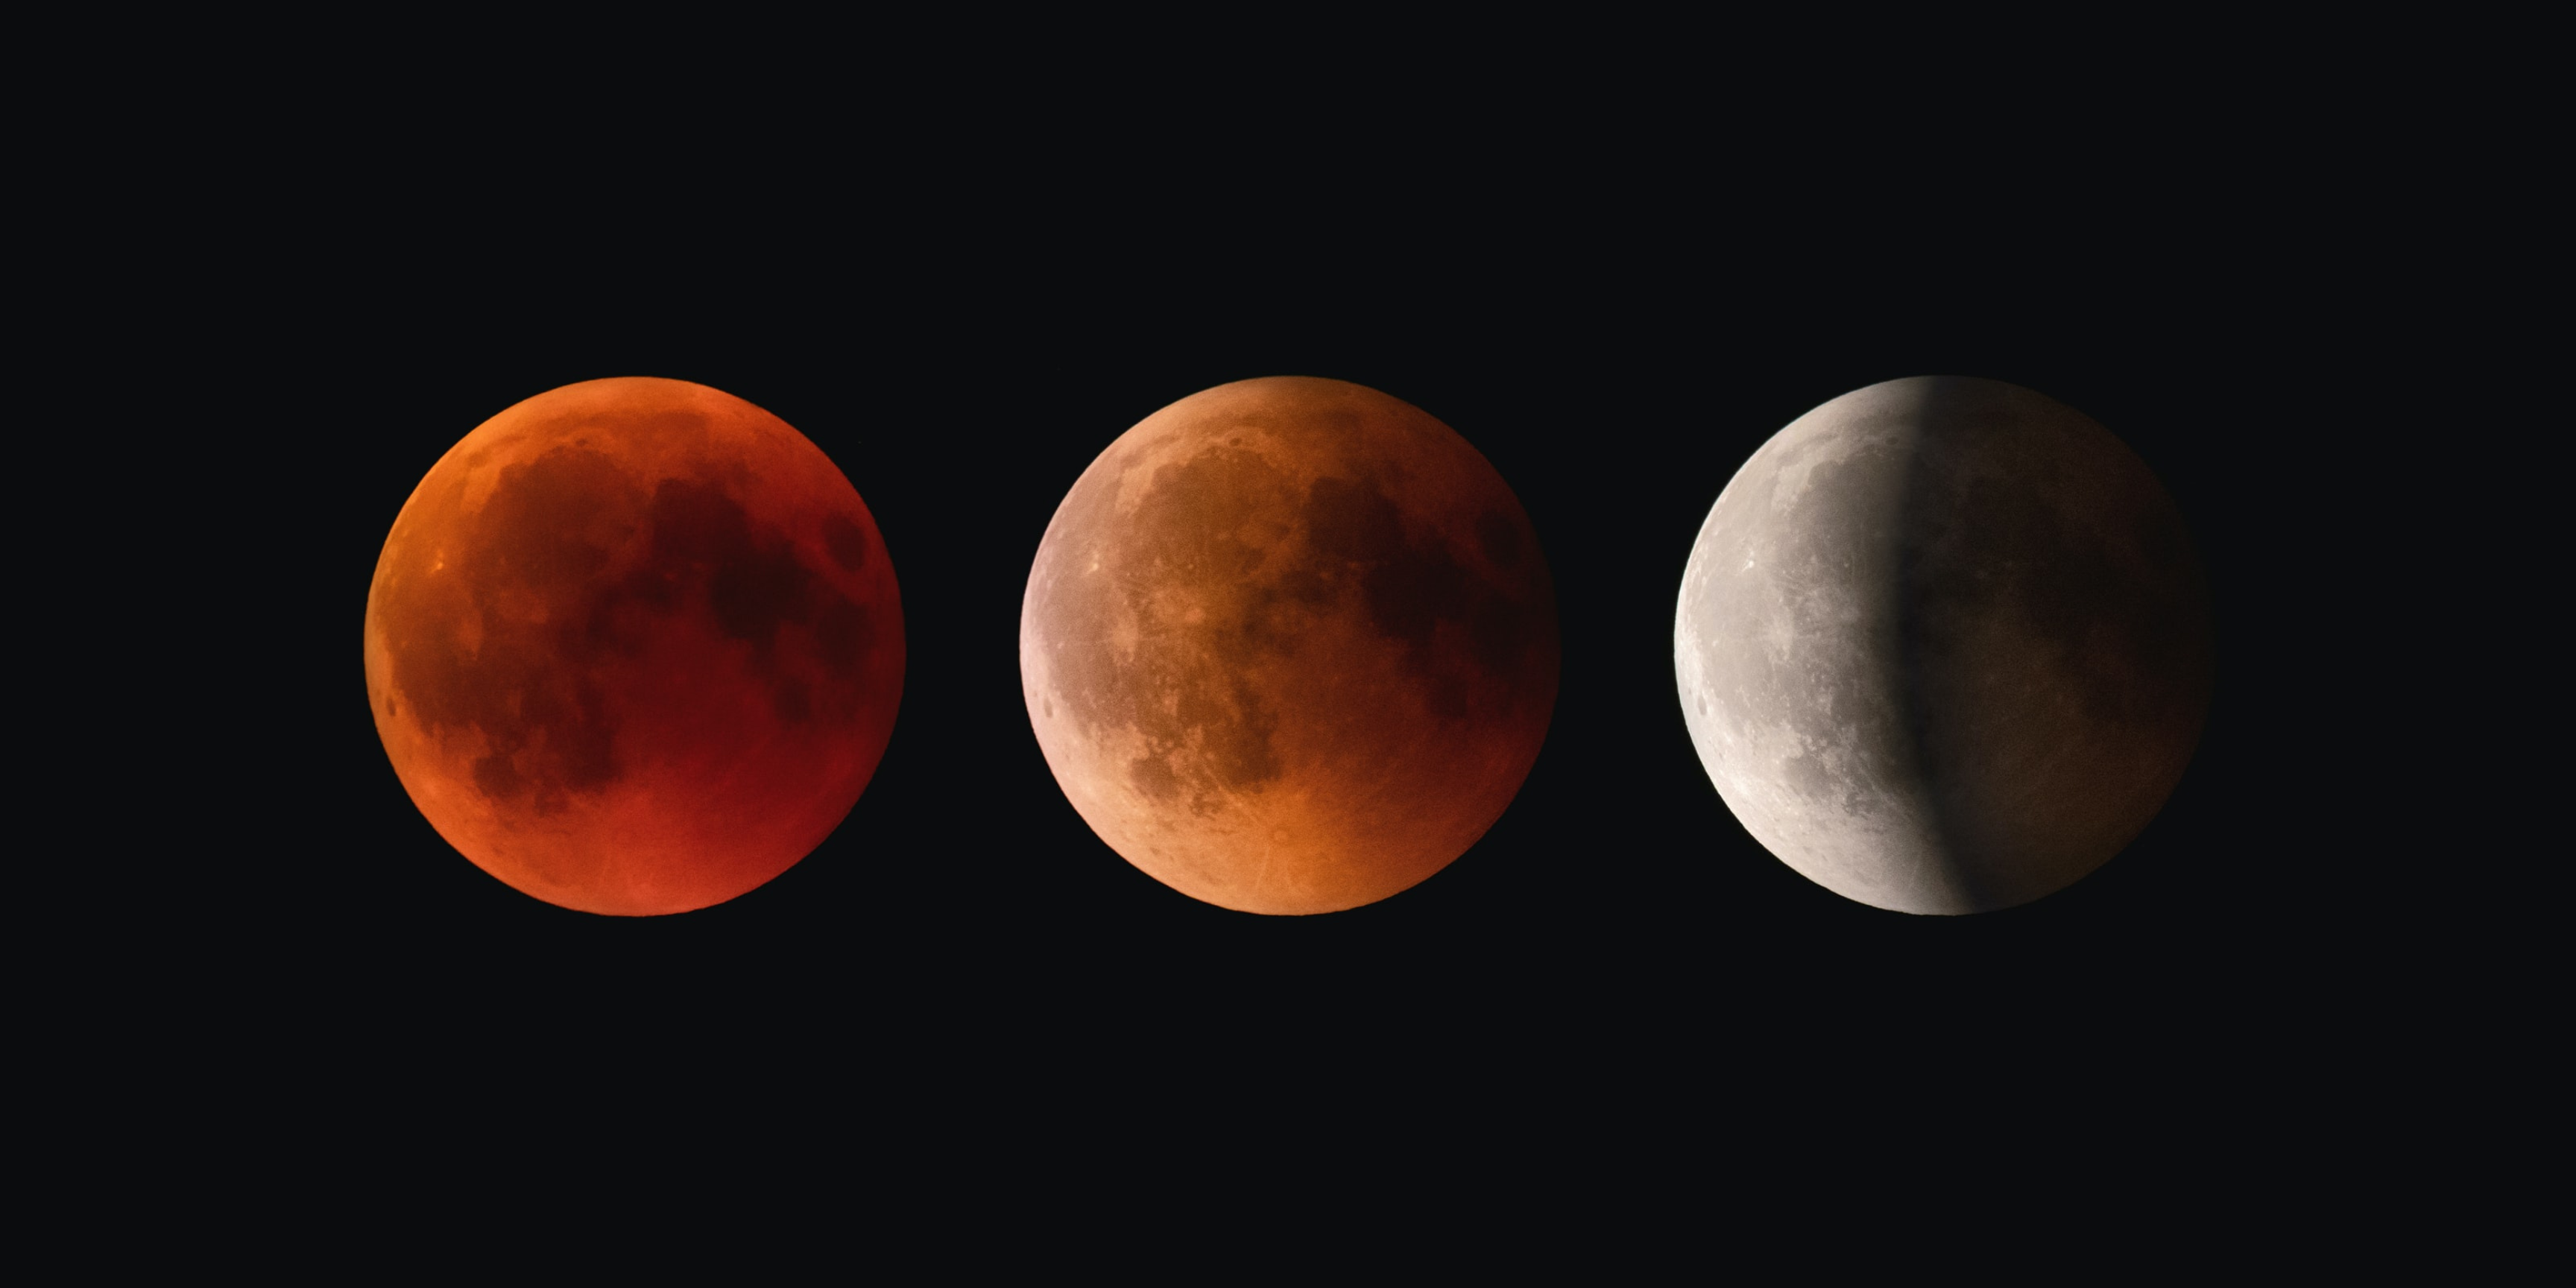 Image depicting 3 stages of a lunar eclipse.